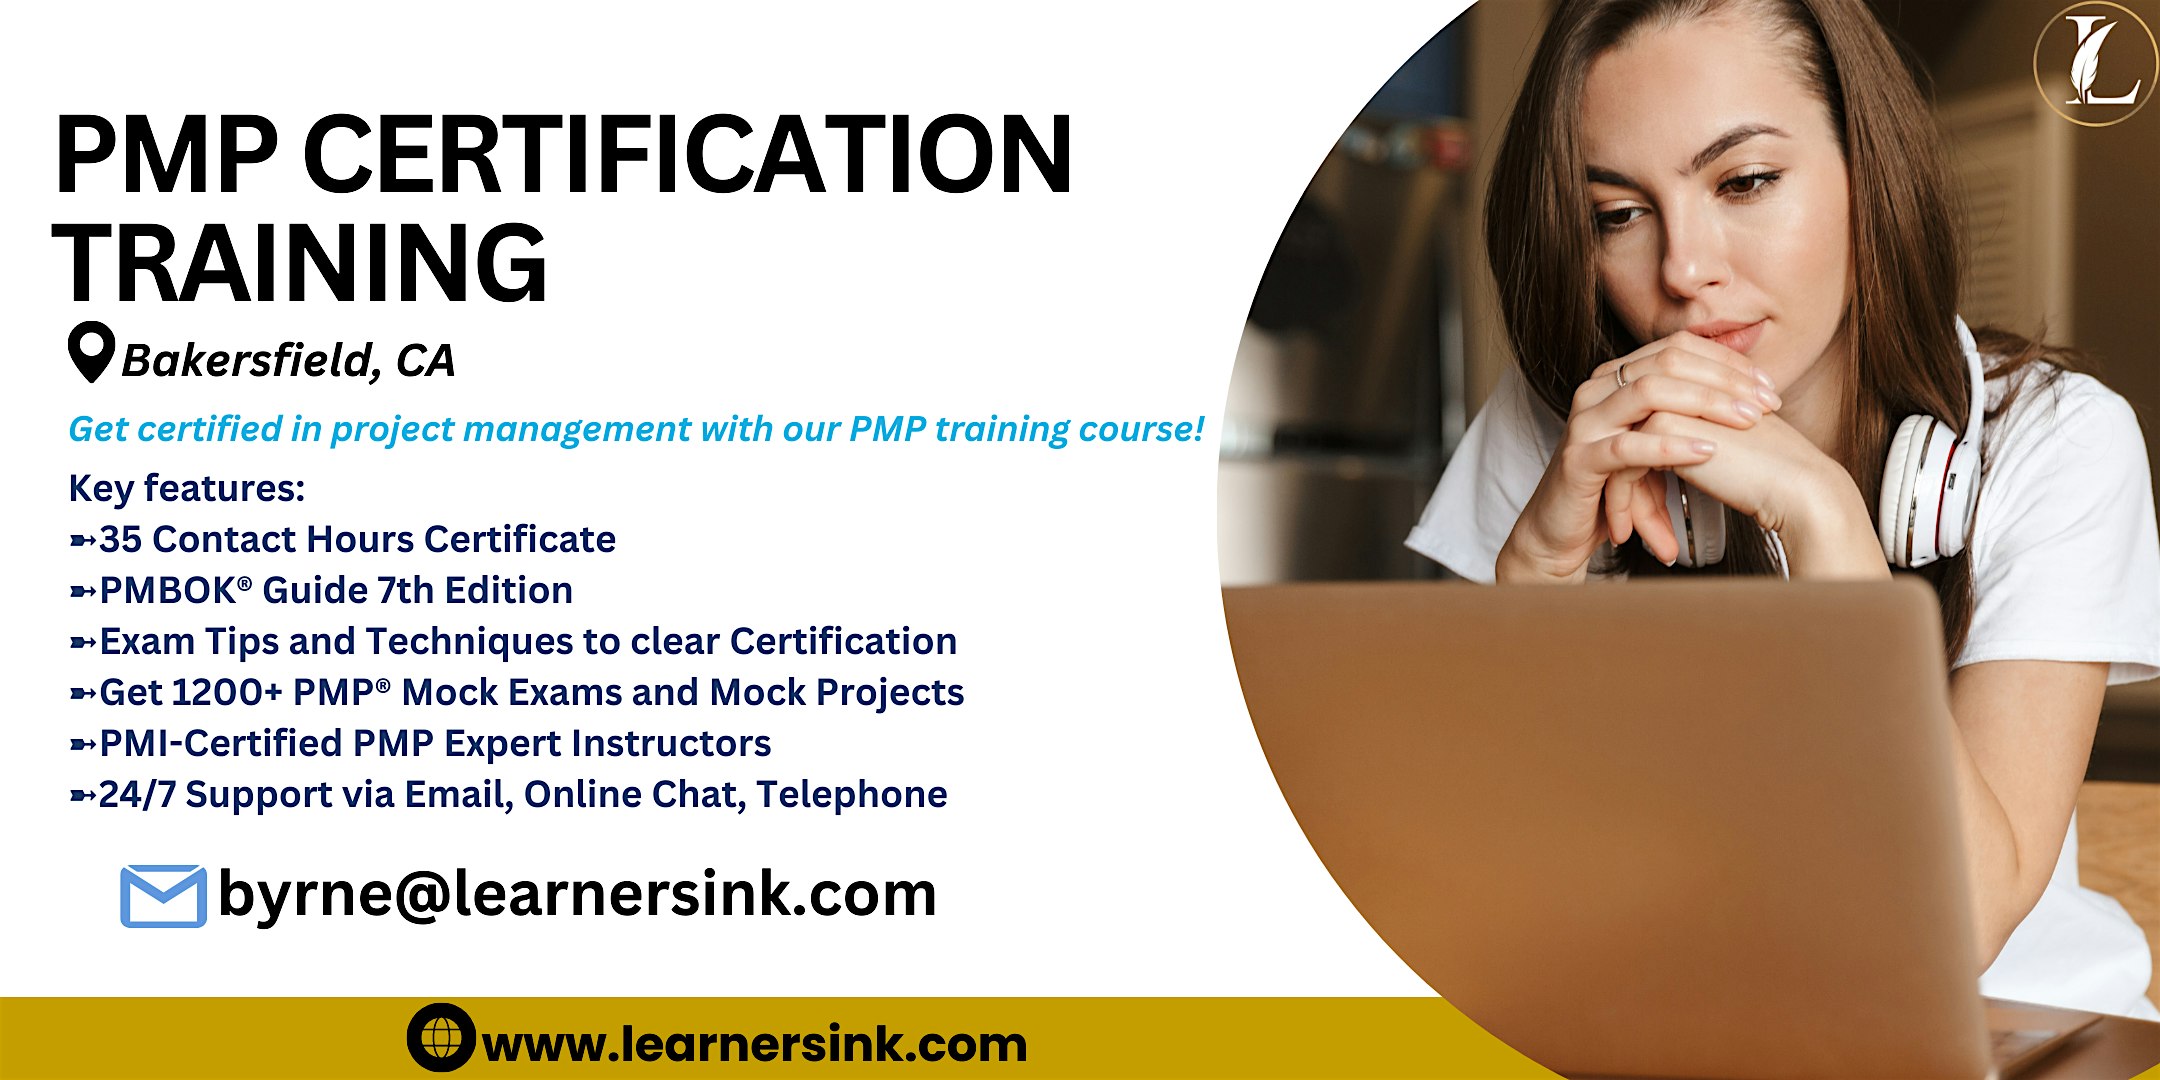 PMP Training Bootcamp in Bakersfield, CA